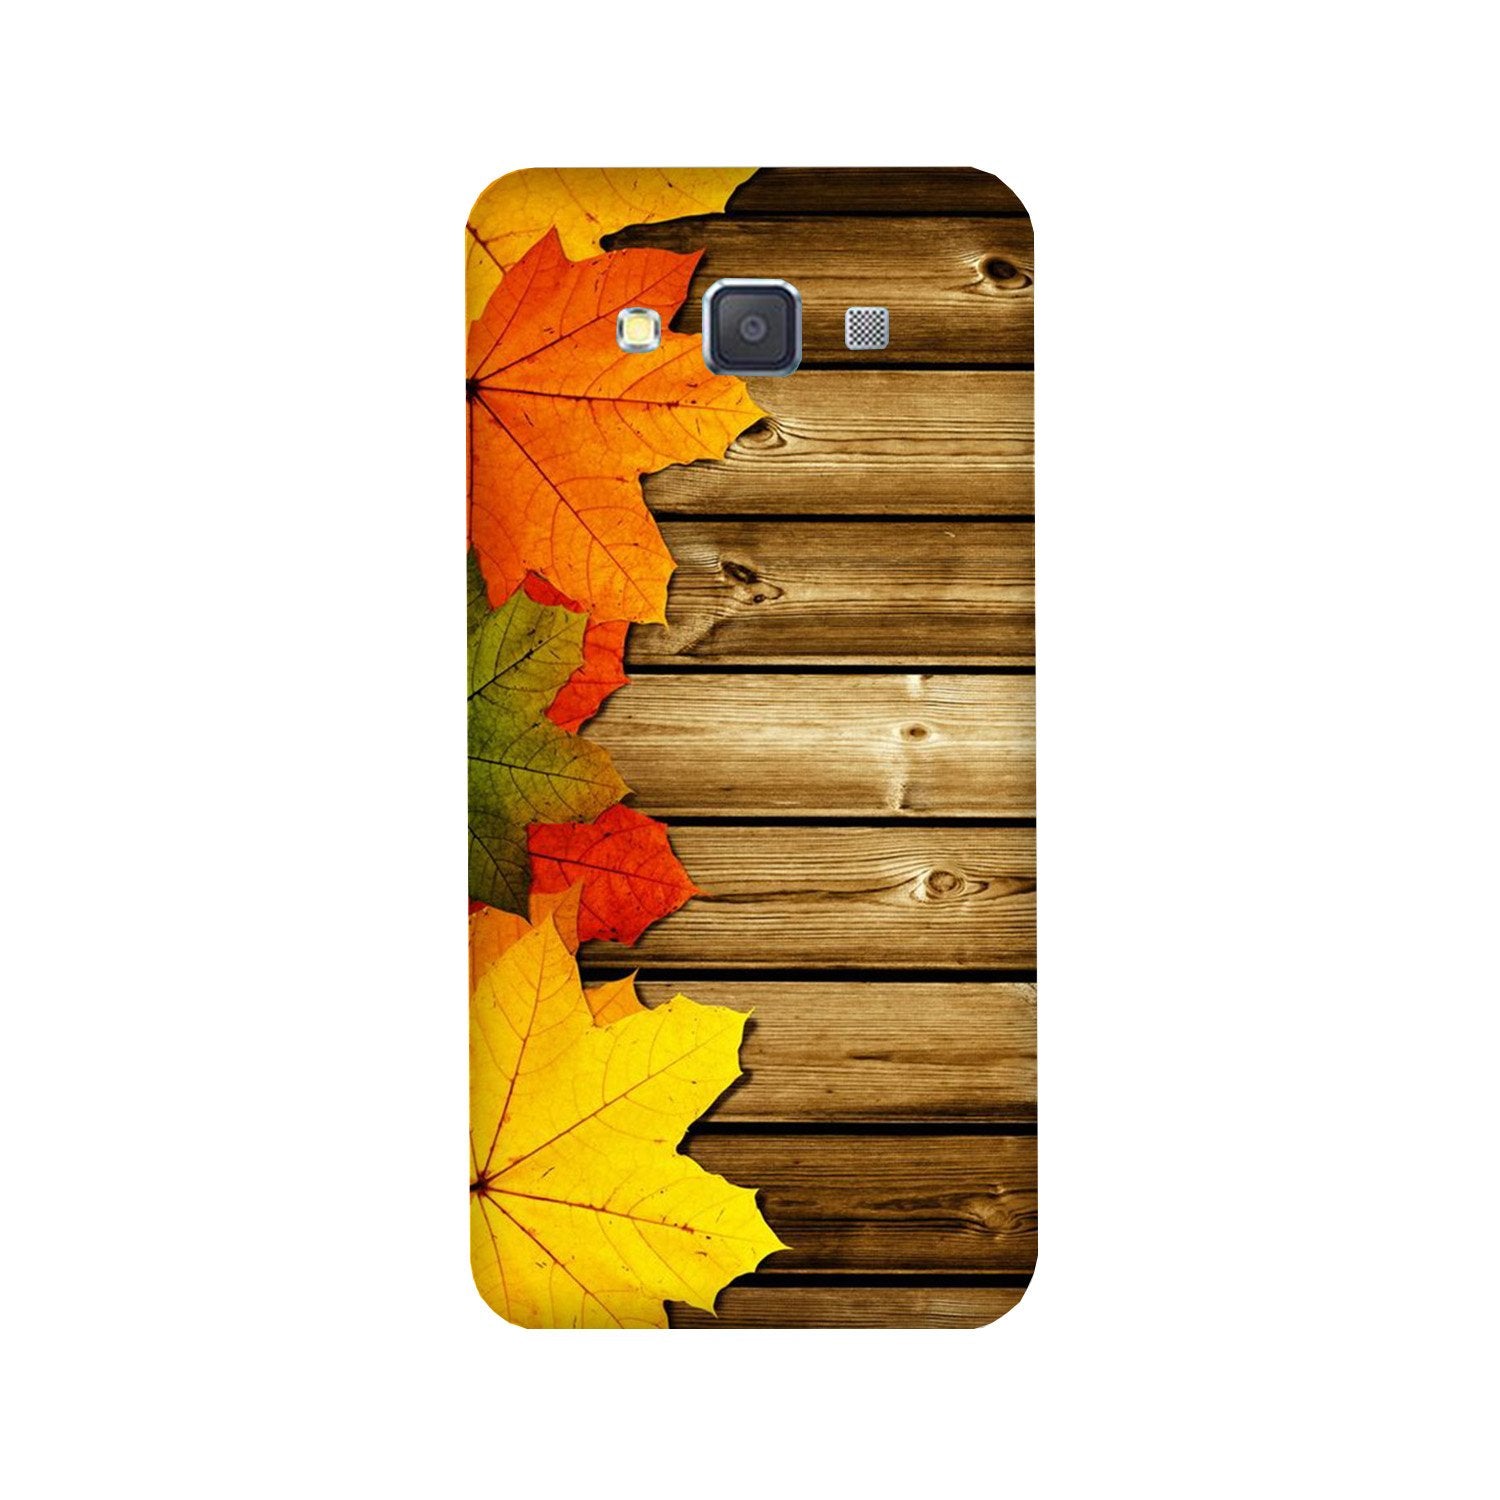 Wooden look3 Case for Galaxy J5 (2016)